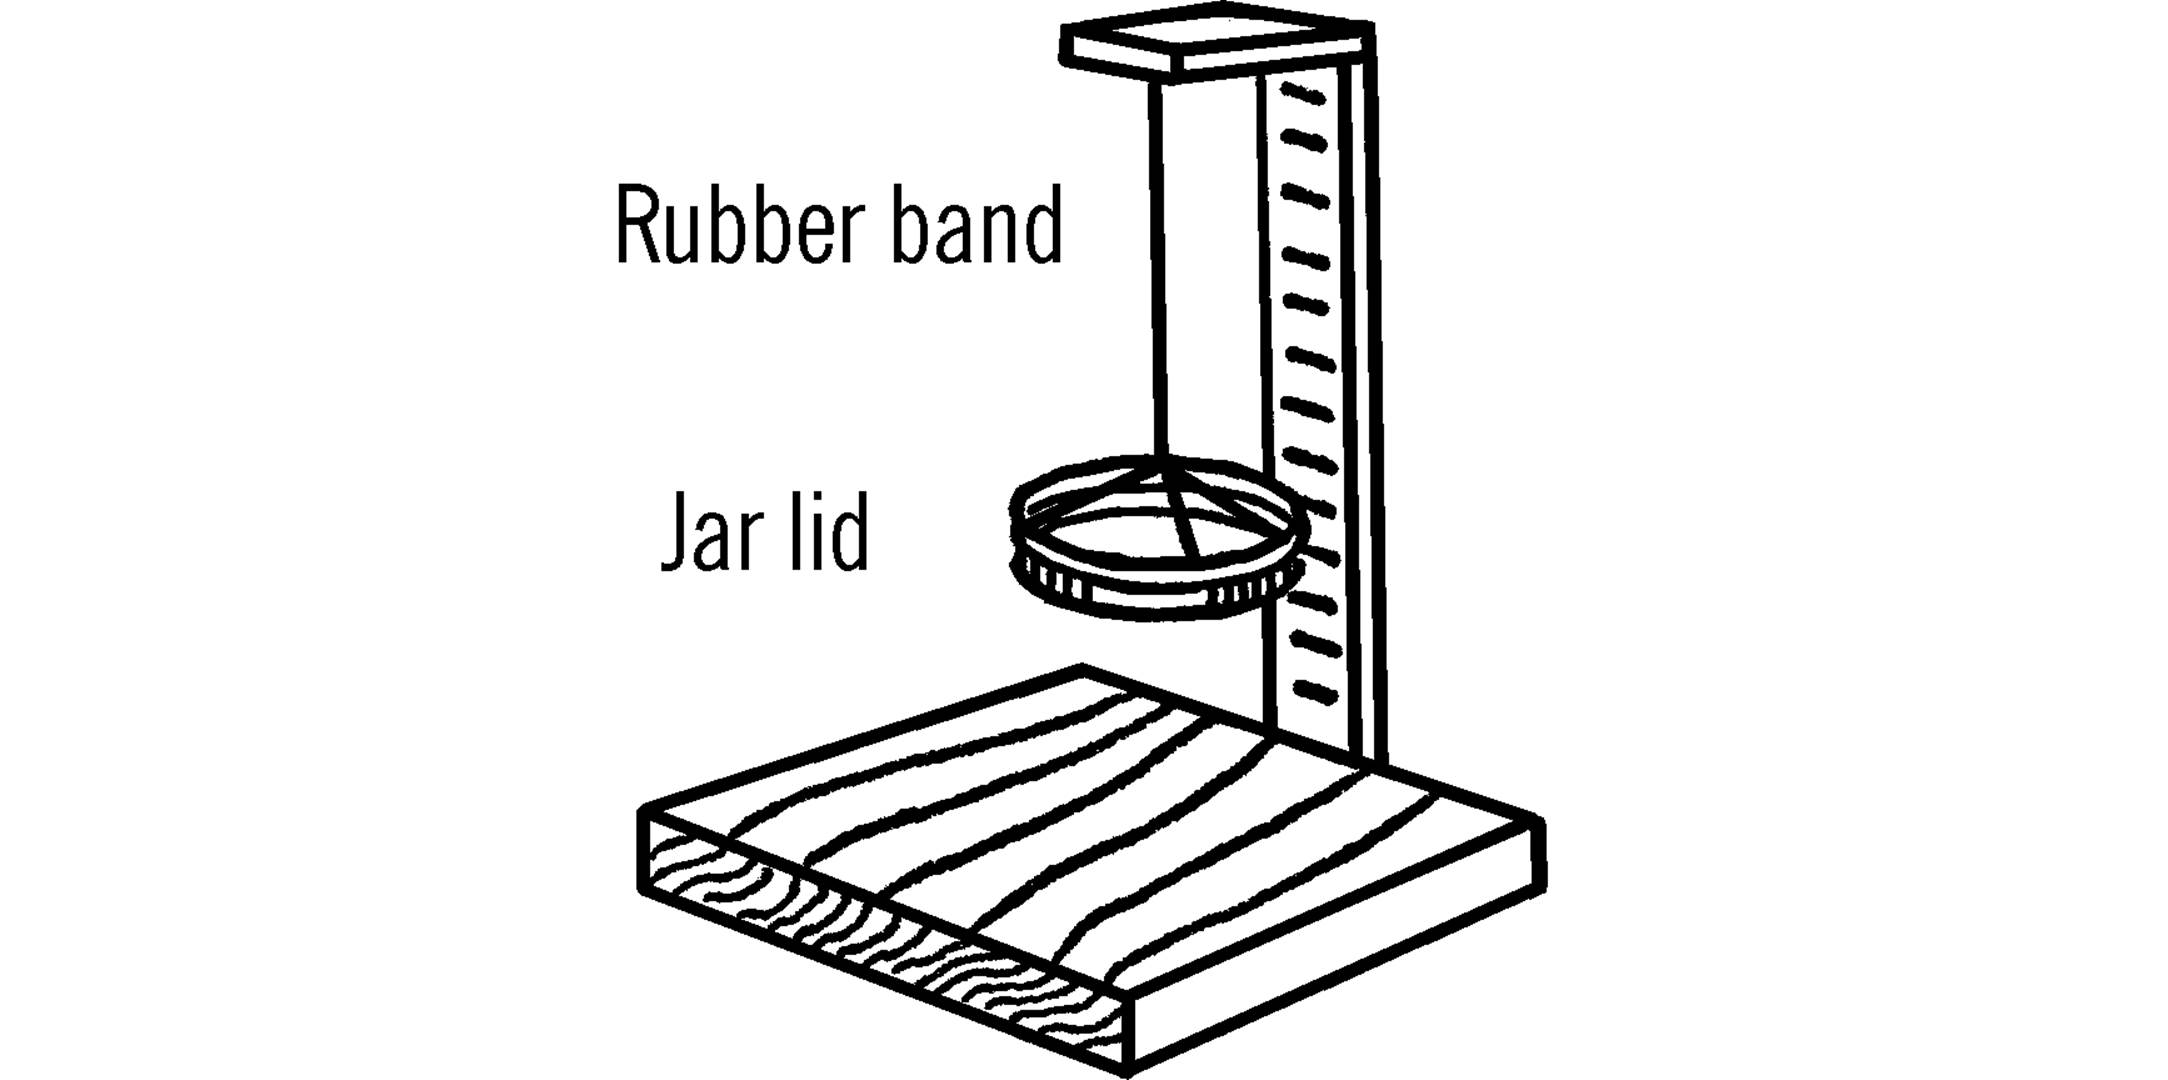 Rubber band weighing scale.